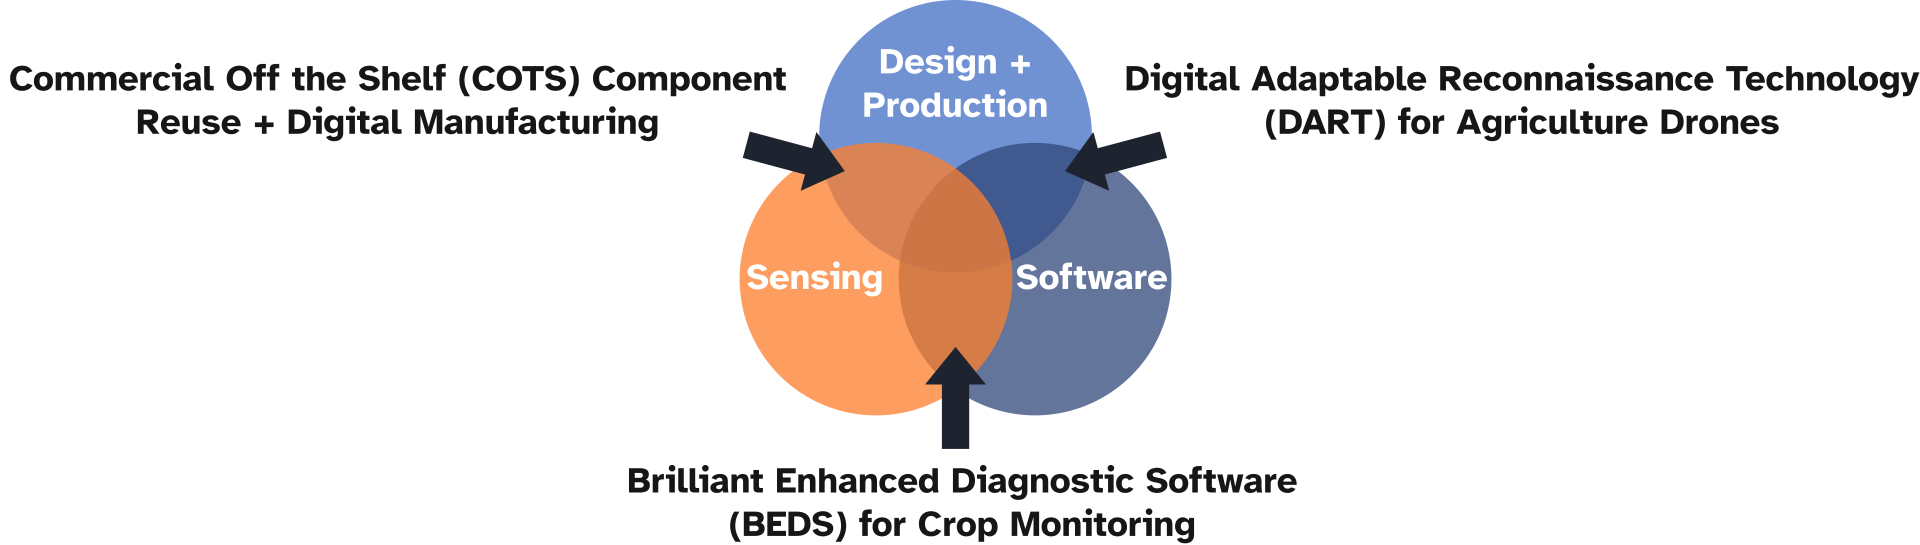 Three-circle Venn Diagram with Design and Production, Sensing, and Software in the 3 main circles. In the intersection between design and production and software, the text reads “Digital Adaptable Reconnaissance Technology (DART) for Agriculture Drones. In the intersection between software and sensing, the text reads “Brilliant Enhanced Diagnostic Software (BEDS) for Crop Monitoring”. In the intersection between sensing and design + production, the text reads “Brilliant Enhanced Diagnostic Software (BEDS) for Crop Monitoring”.